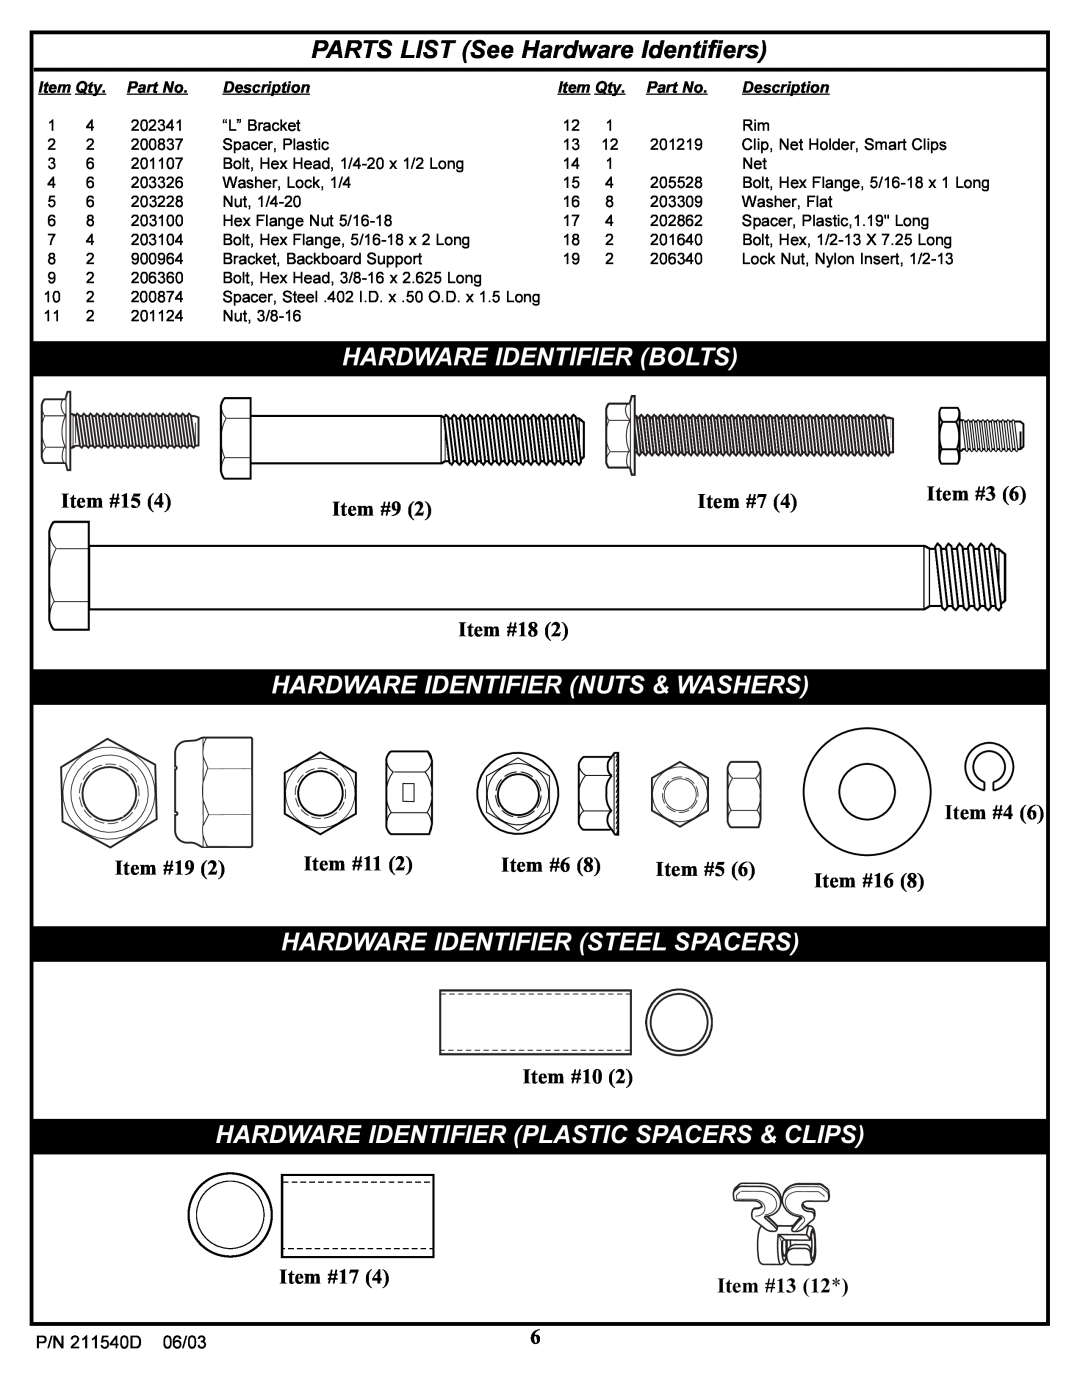 Huffy Backboard and Rim PARTS LIST See Hardware Identifiers, Hardware Identifier Bolts, Hardware Identifier Nuts & Washers 